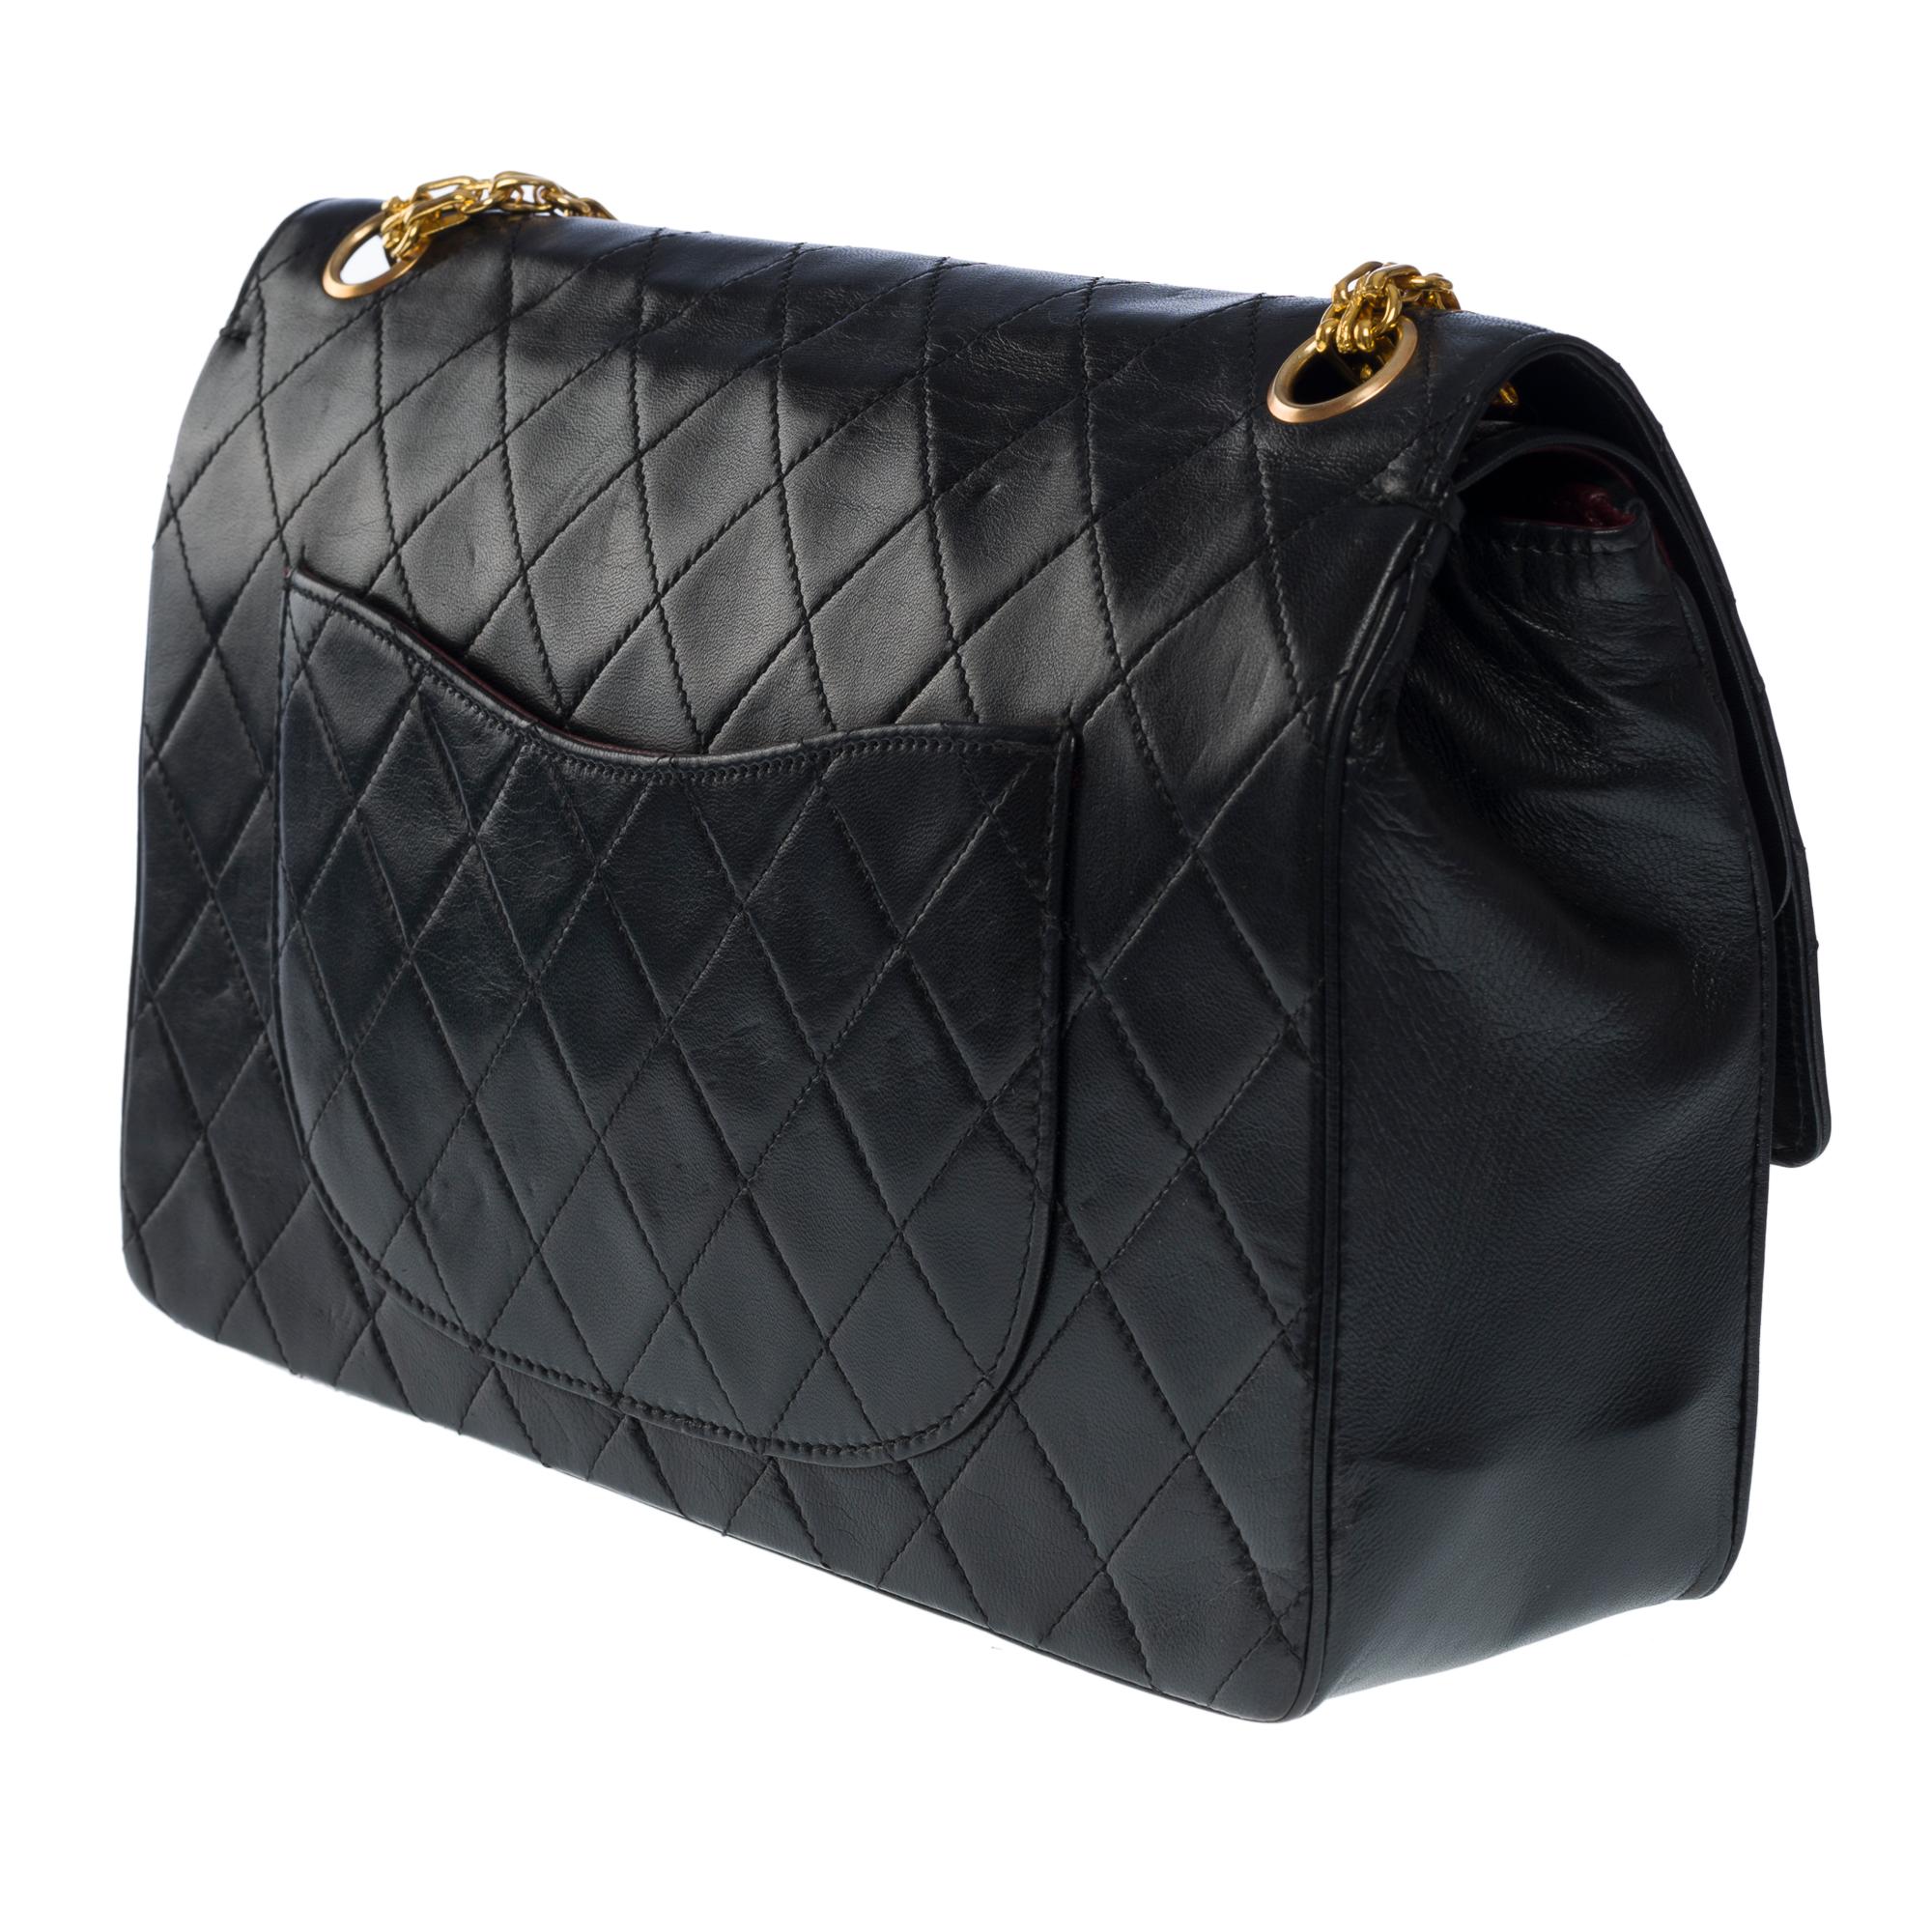 Chanel Timeless/Classic double flap shoulder bag in black quilted lambskin, GHW 1